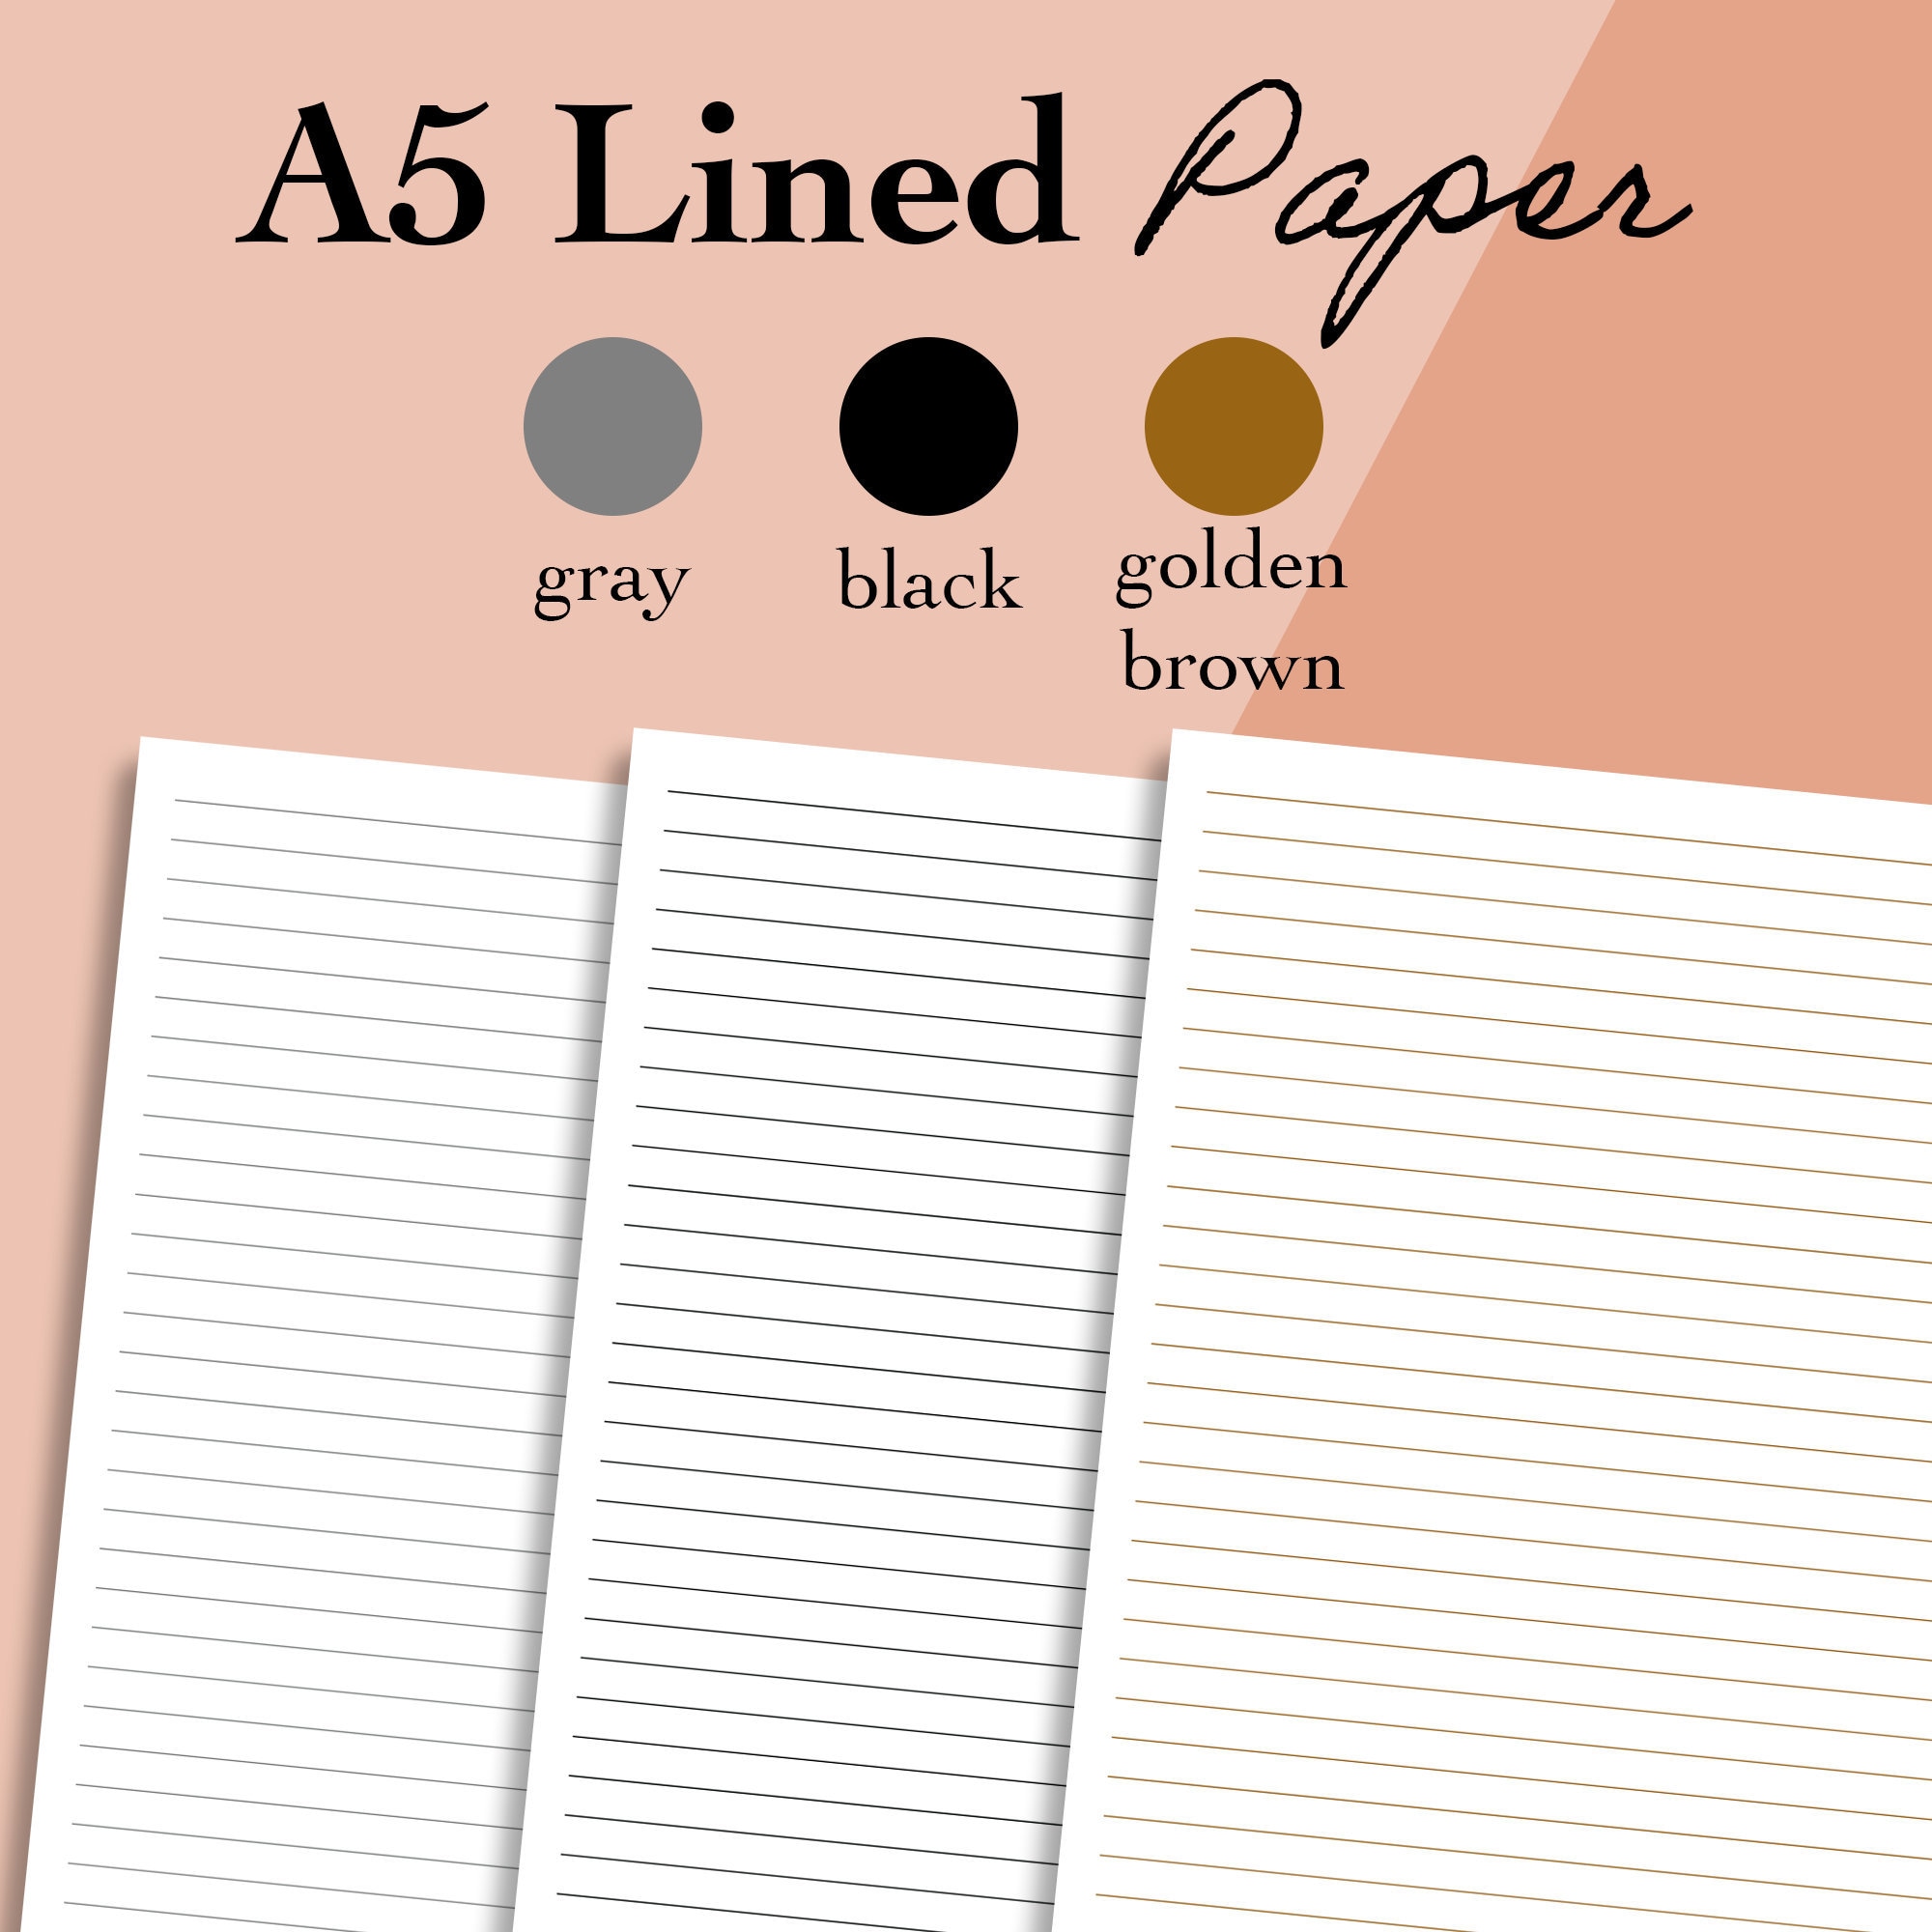 A5 Lined Paper Printable A5 Journal Ruled Paper Inserts PDF | Etsy